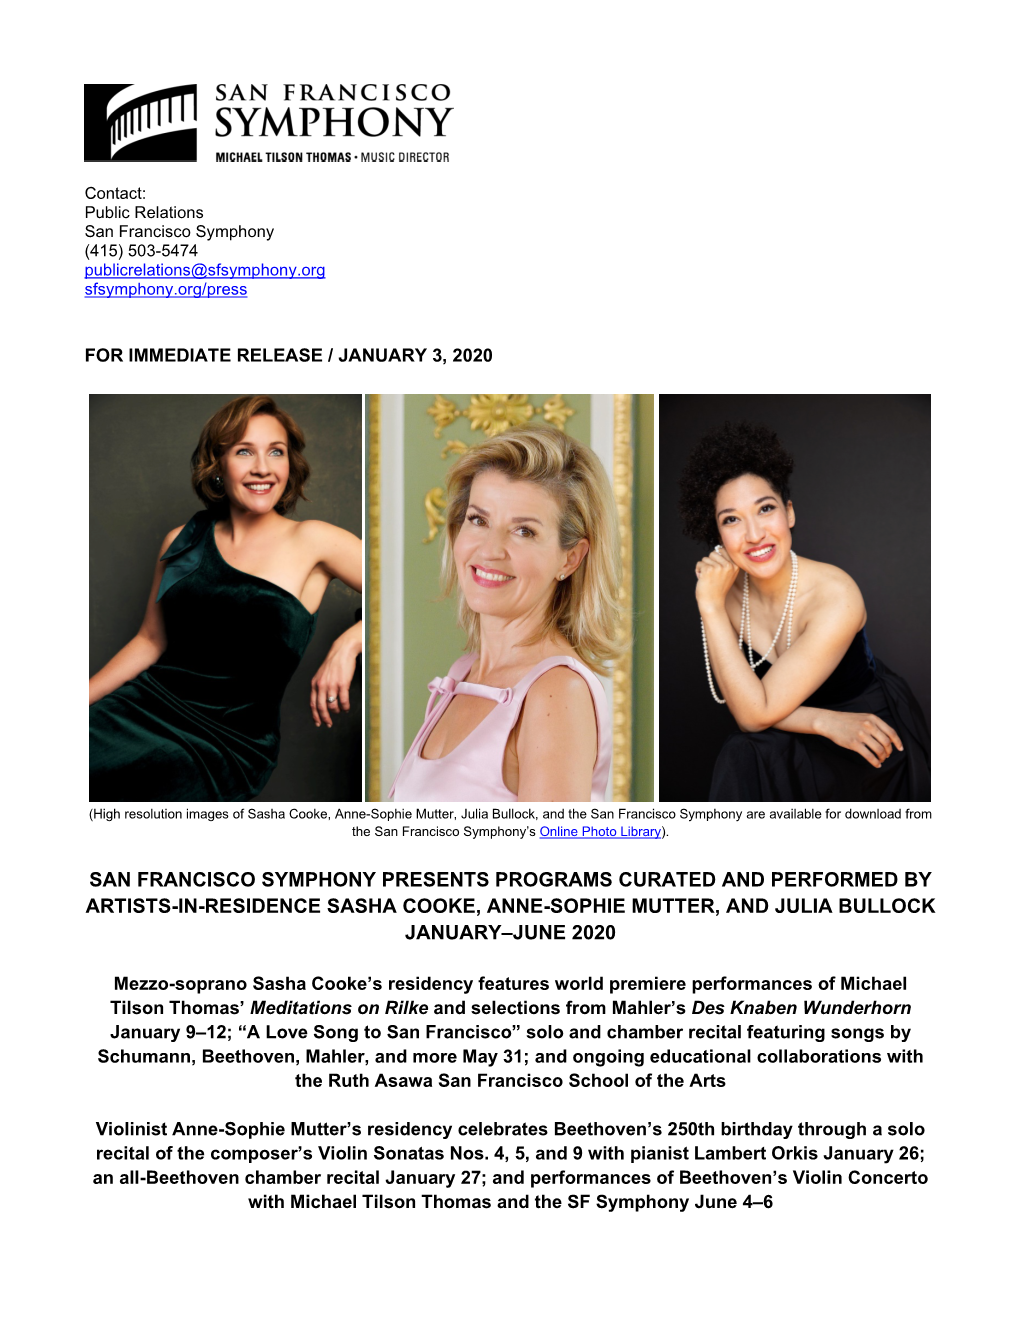 San Francisco Symphony Presents Programs Curated and Performed by Artists-In-Residence Sasha Cooke, Anne-Sophie Mutter, and Julia Bullock January–June 2020